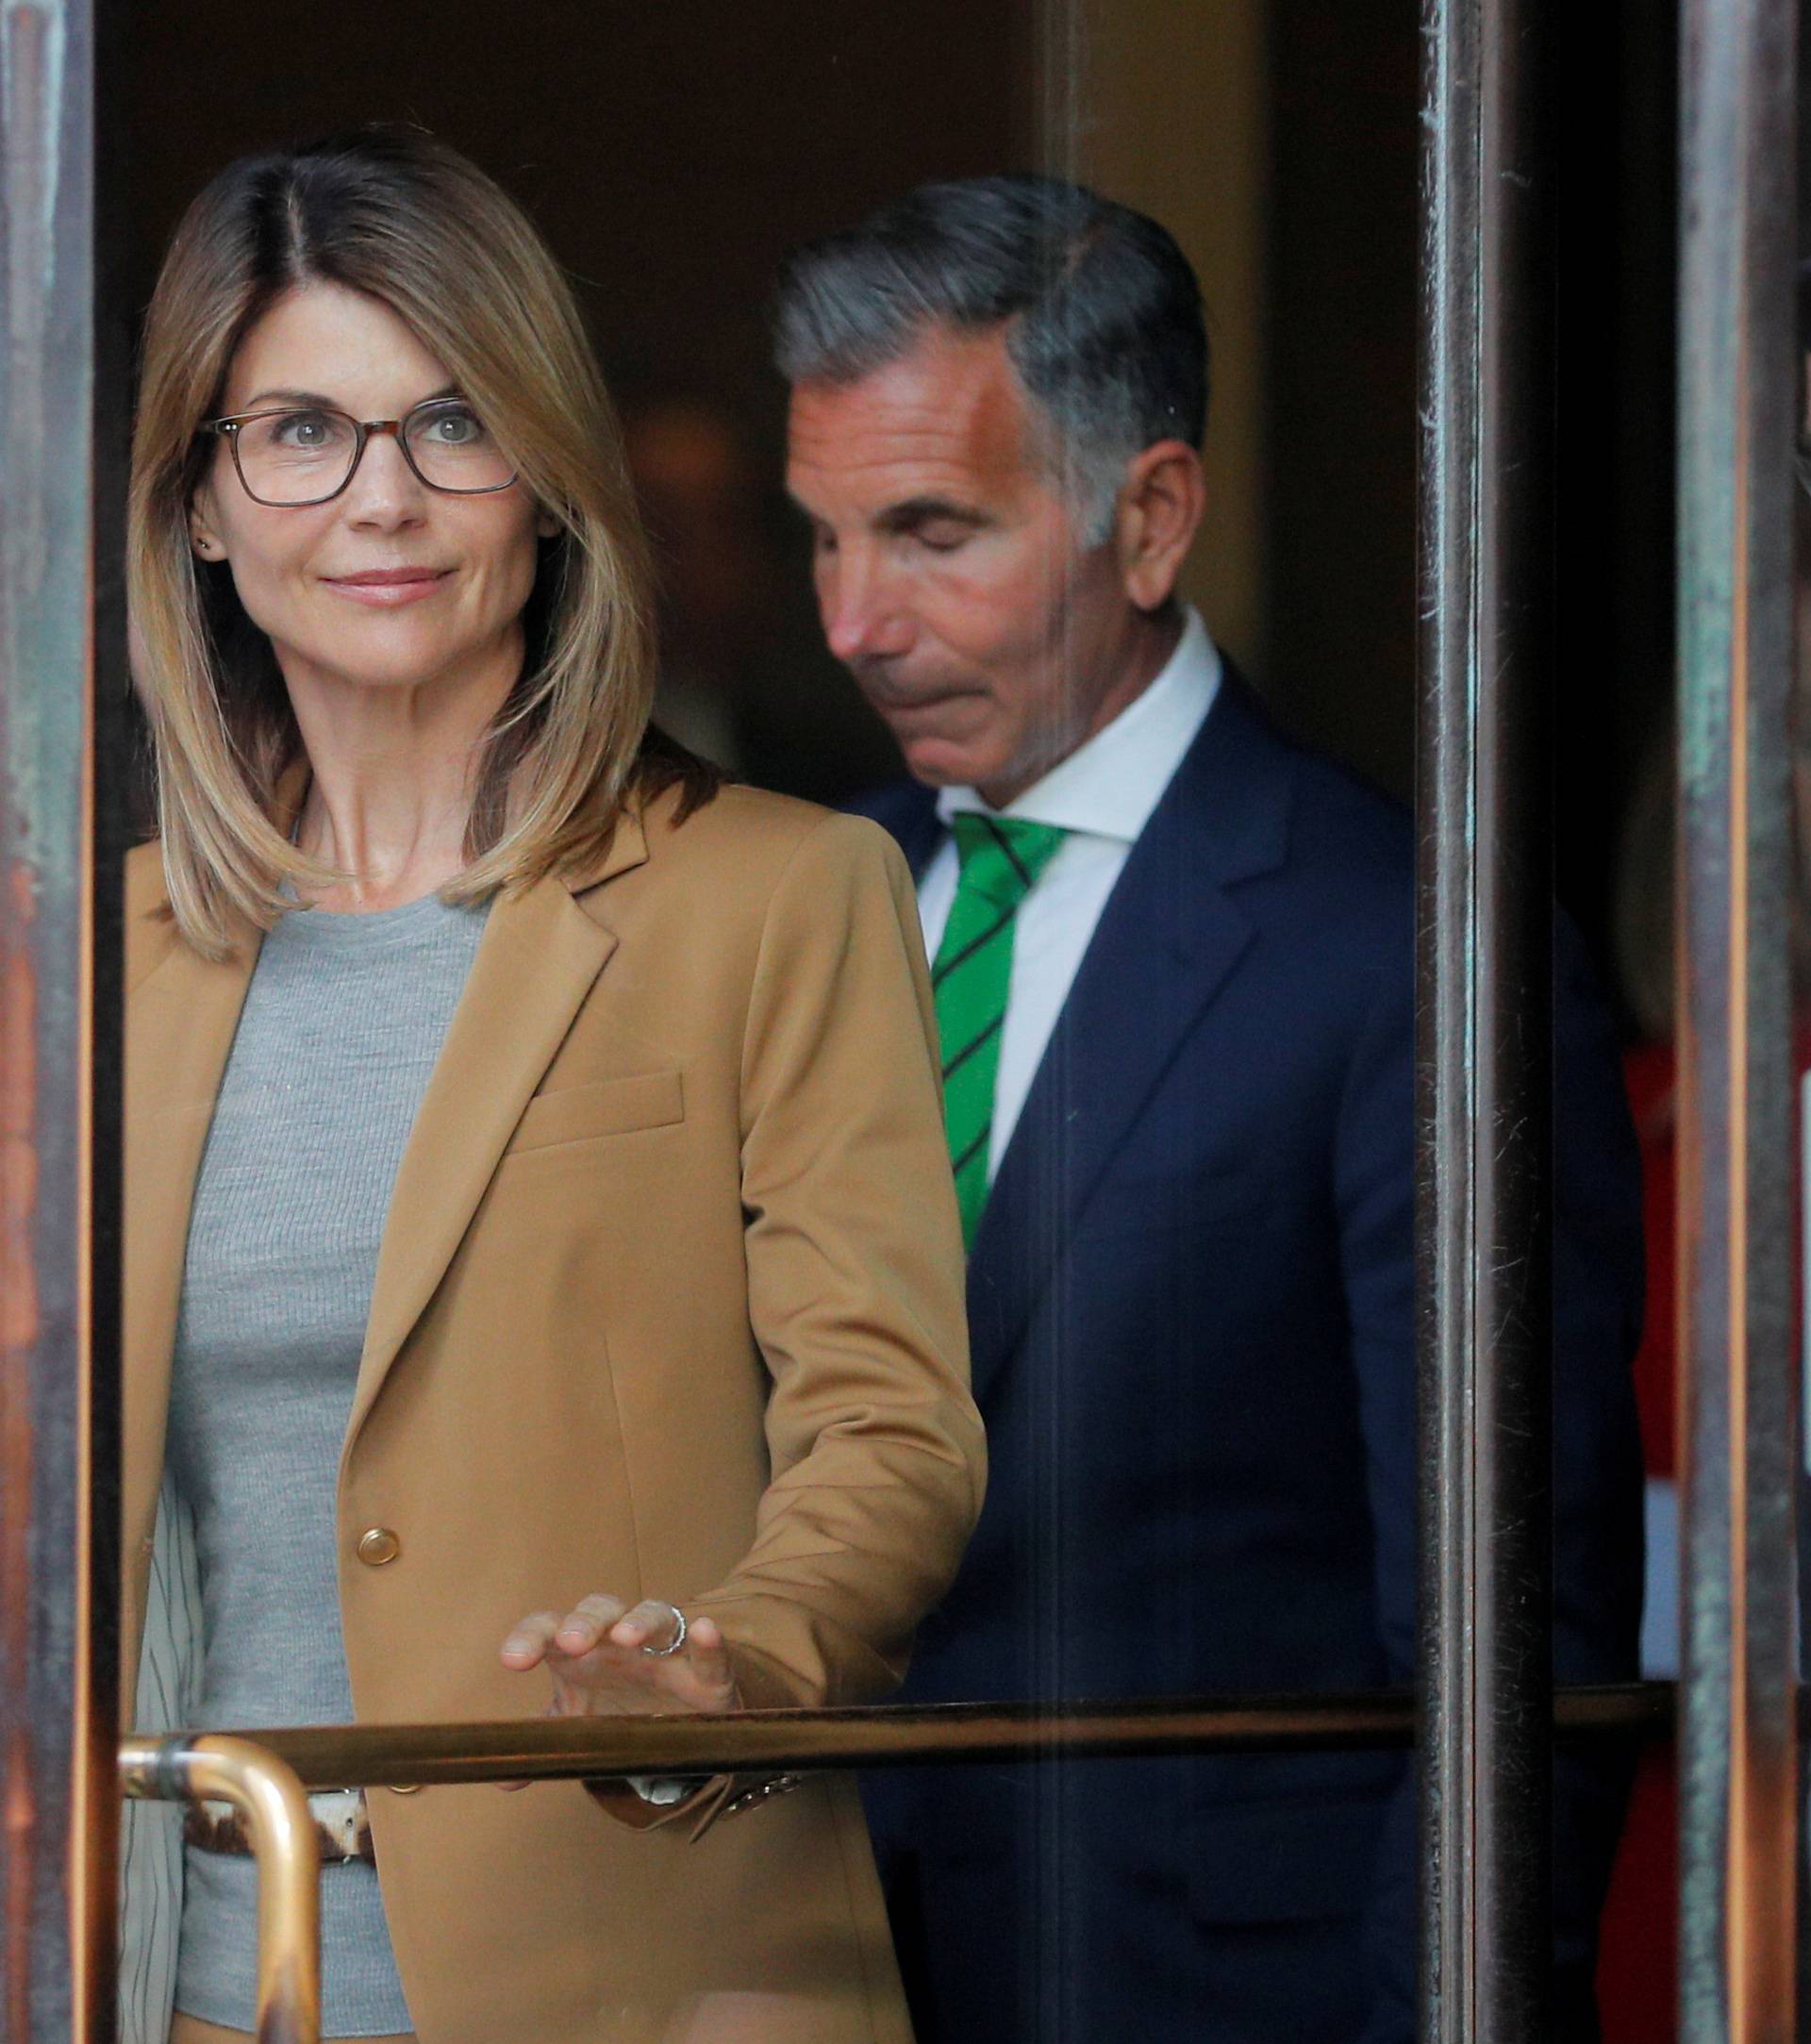 FILE PHOTO: Actor Lori Loughlin, and husband, fashion designer Mossimo Giannulli, facing charges in a nationwide college admissions cheating scheme, leave federal court in Boston